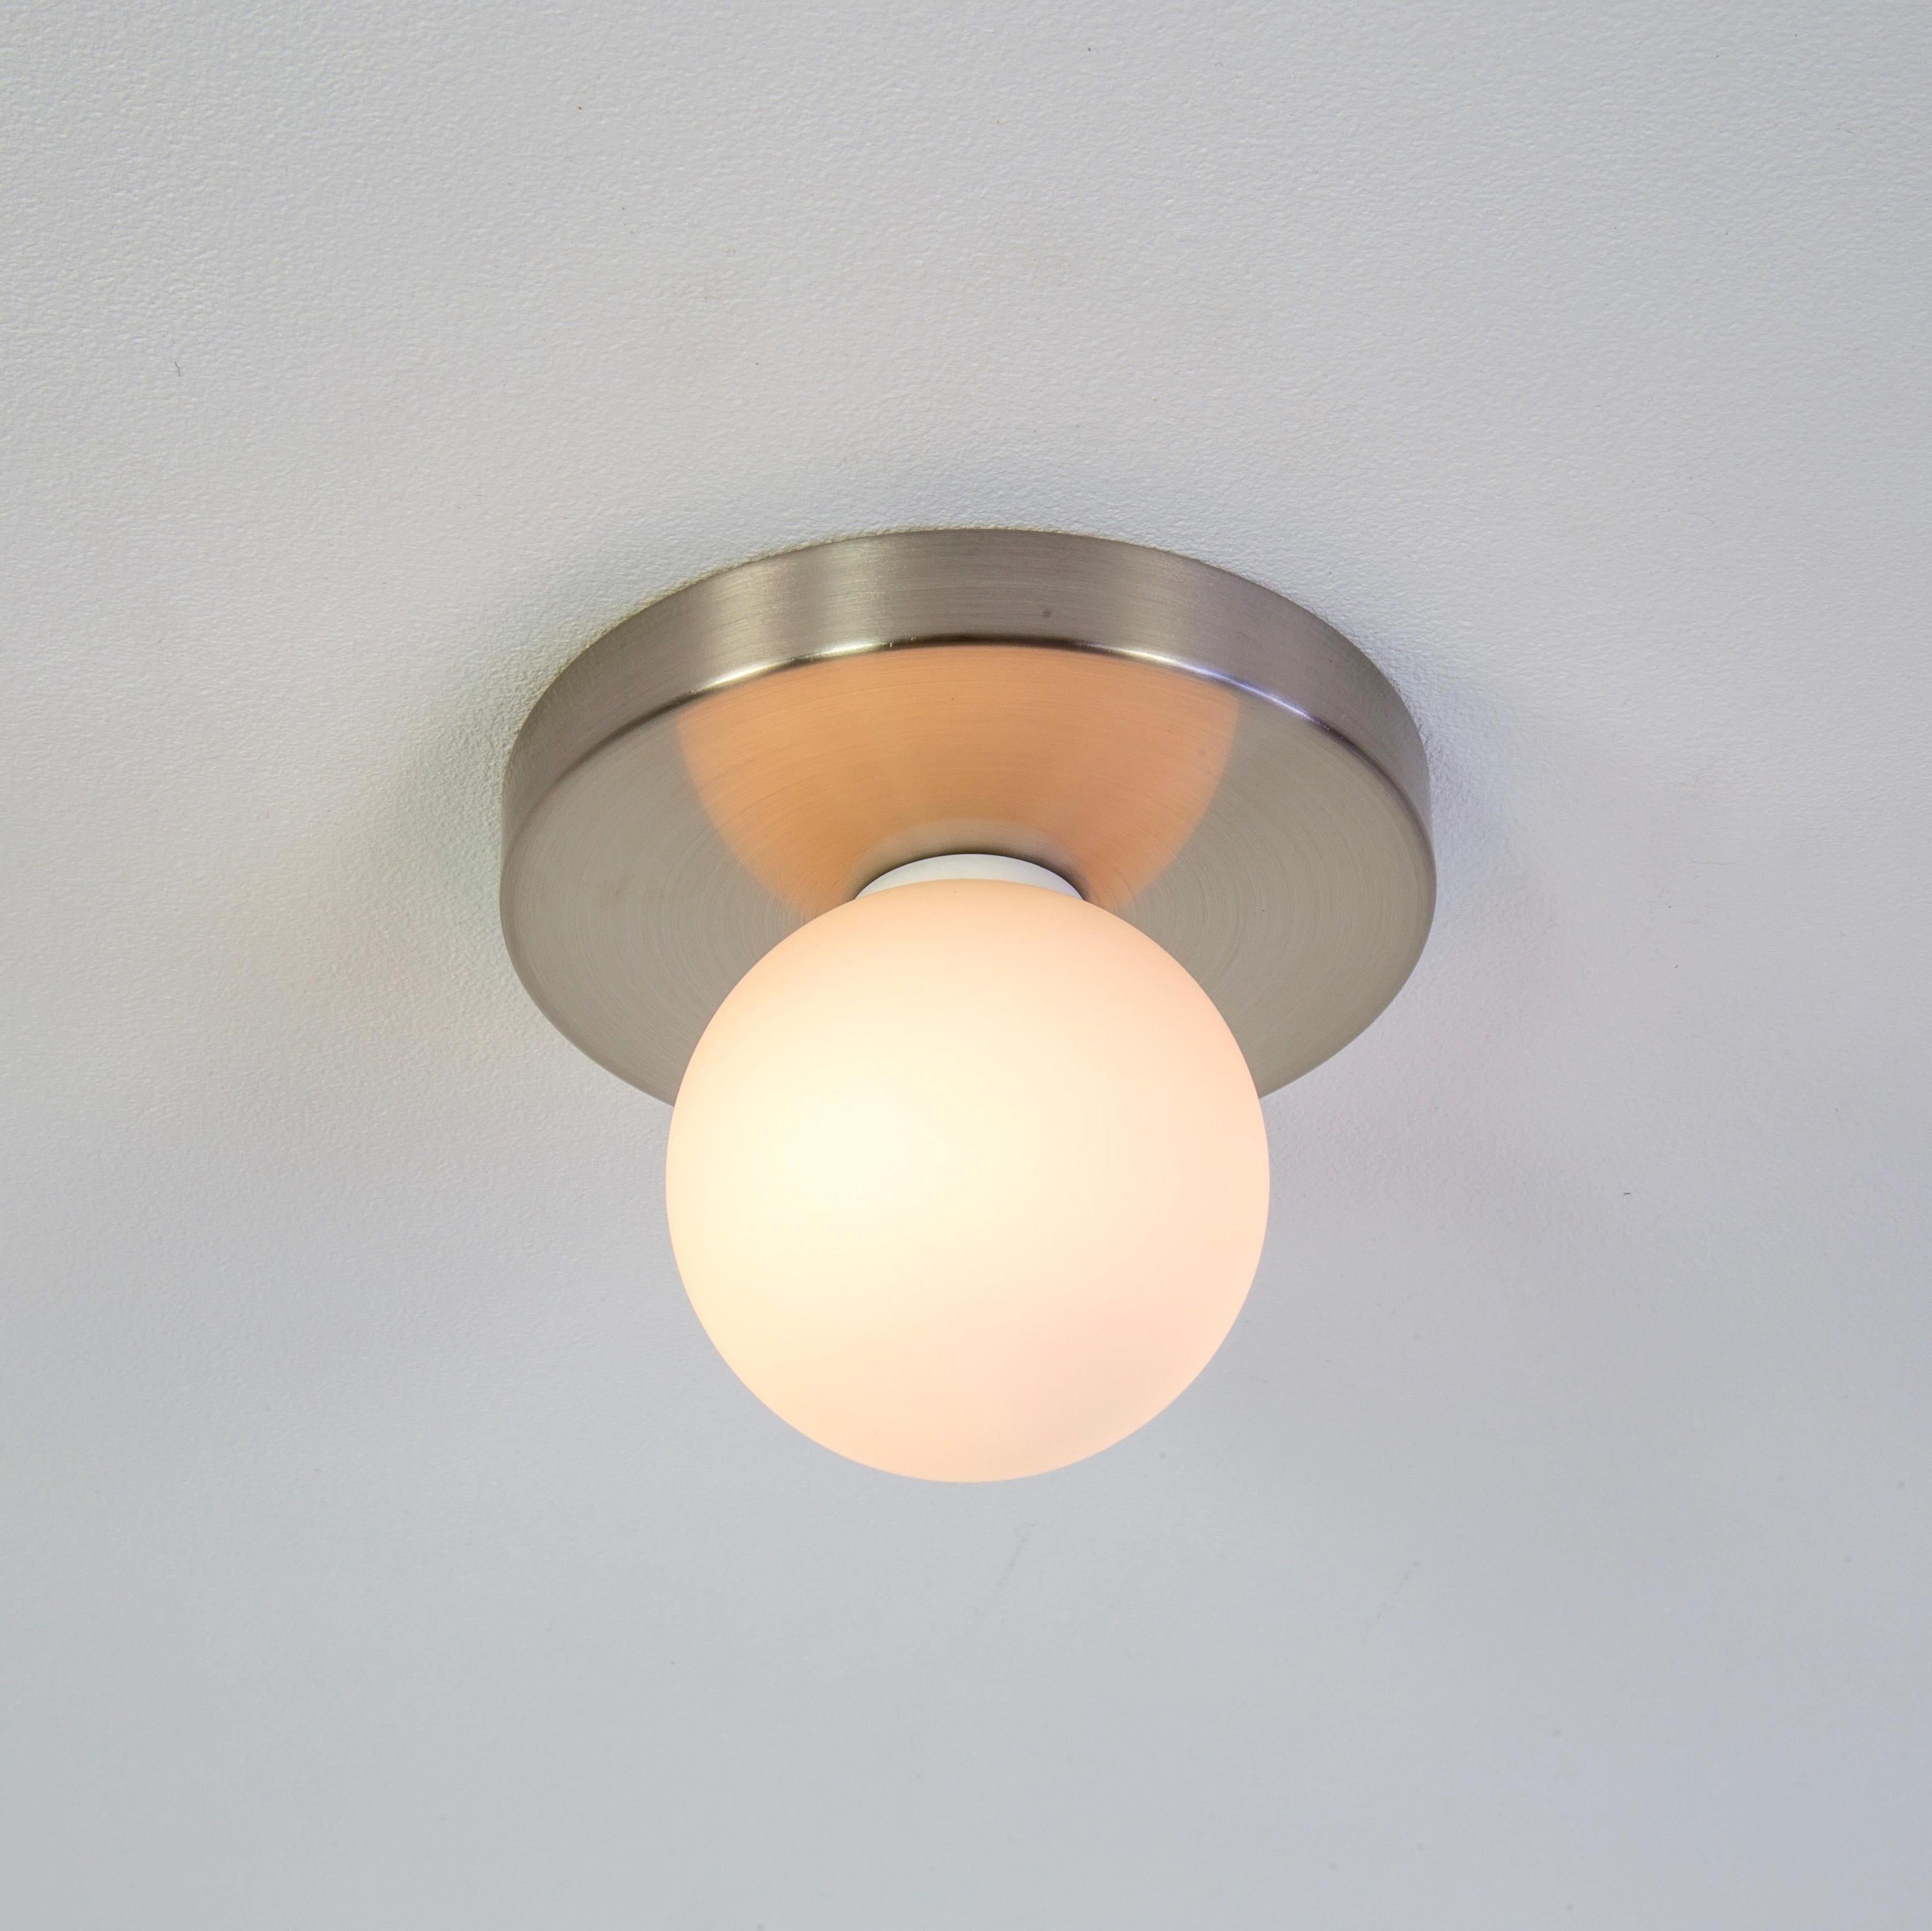 American Globe Flush Mount by Research.Lighting, Brushed Nickel, Made to Order For Sale